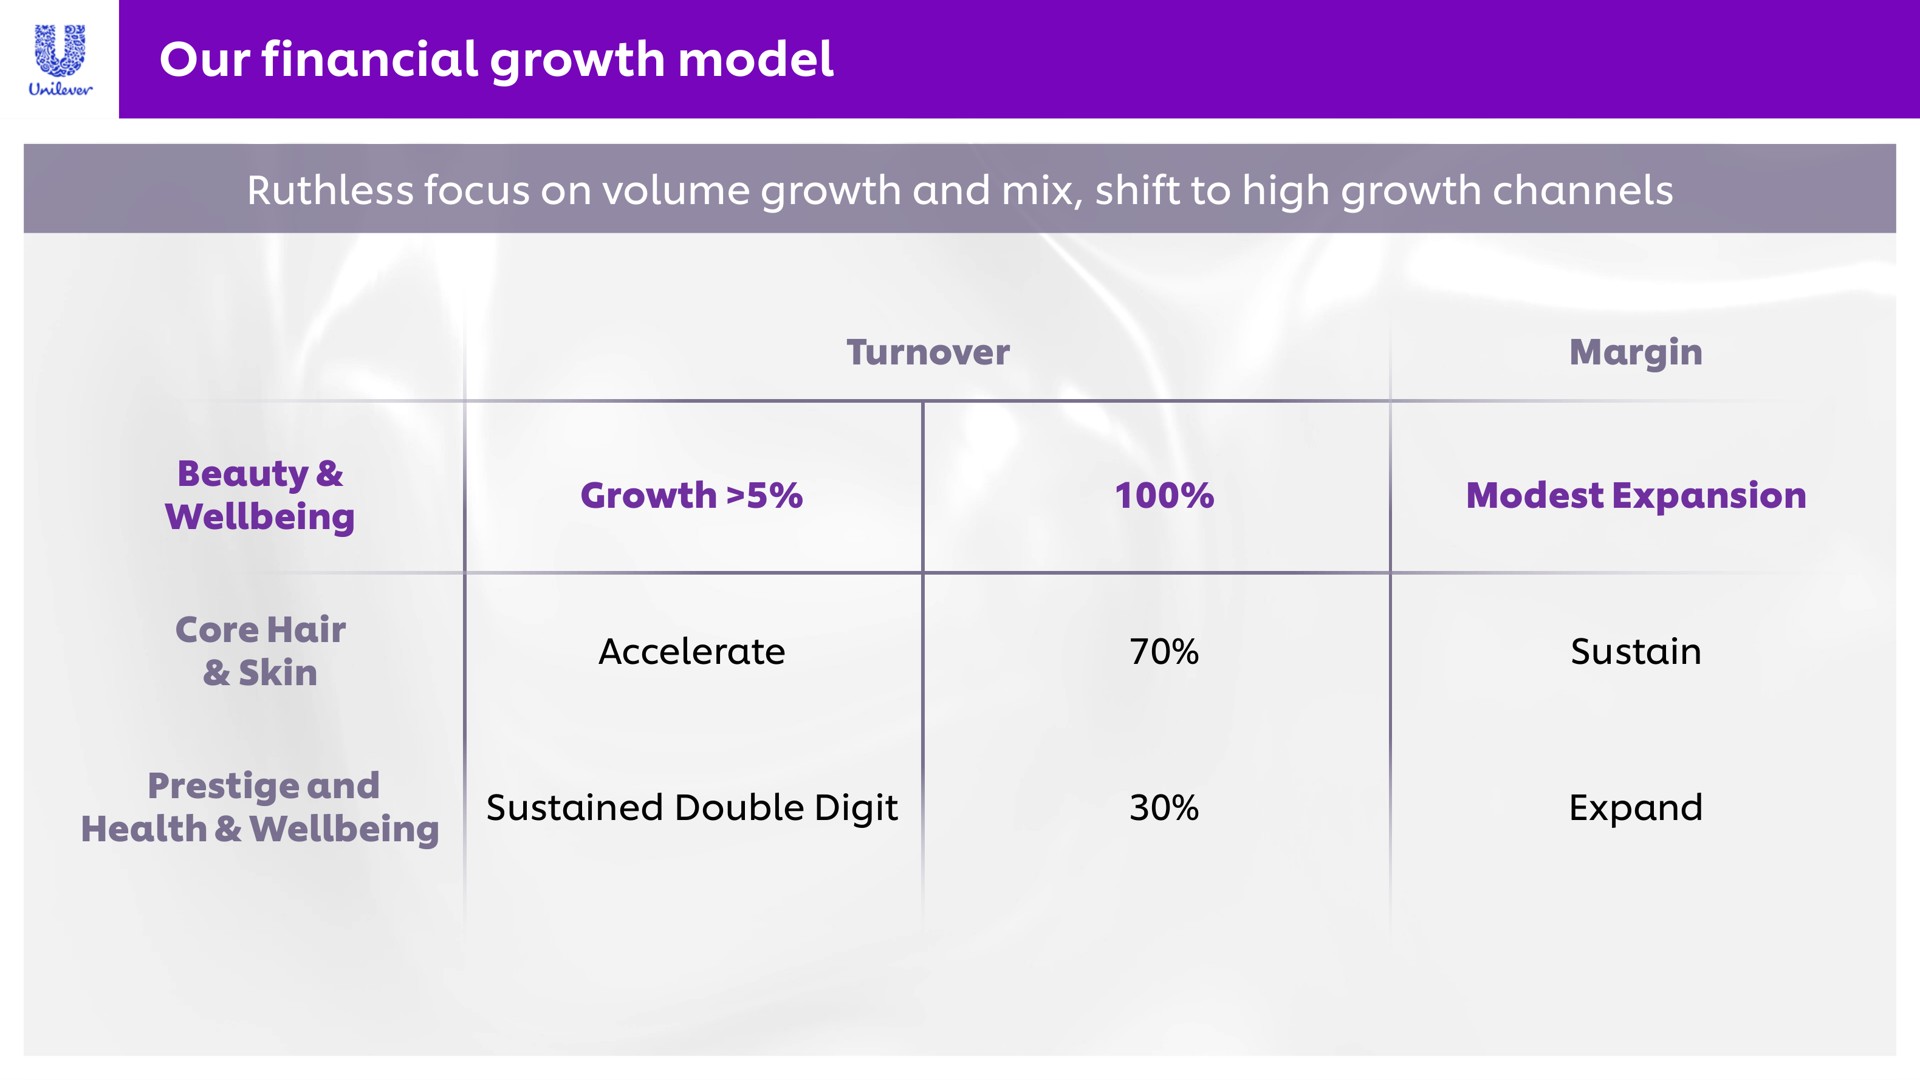 our financial growth model | Unilever